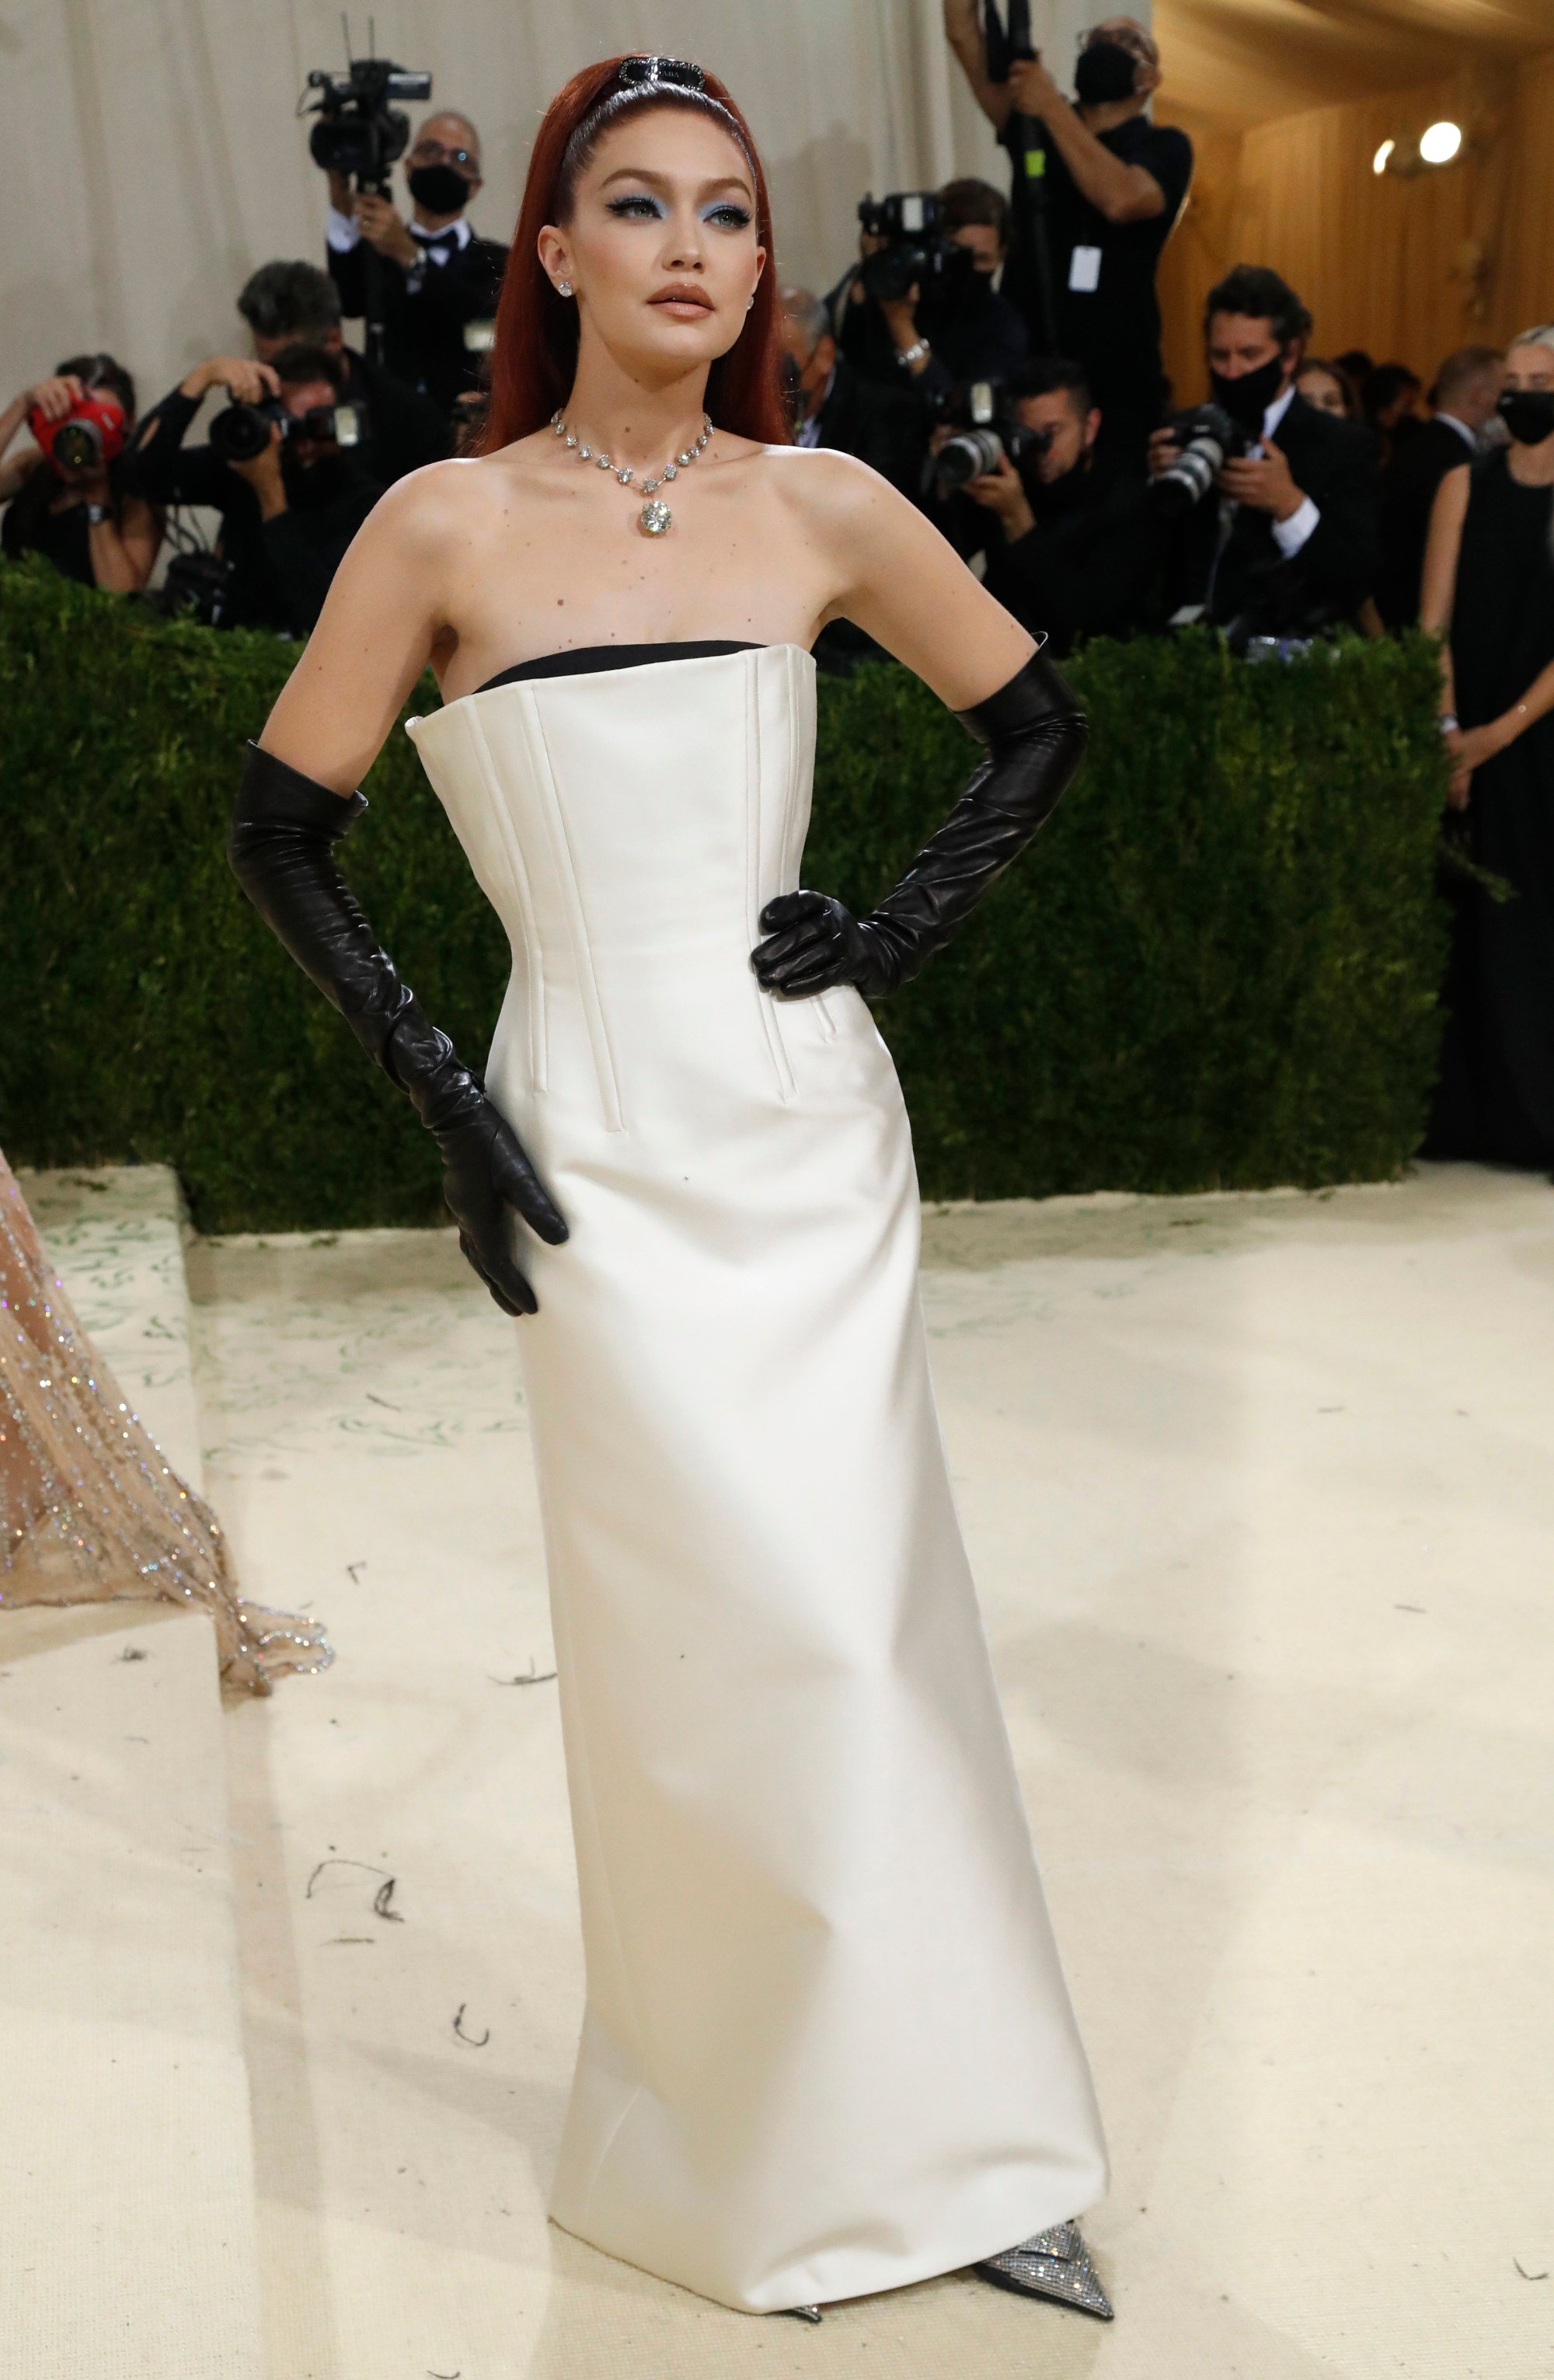 Emma Stone wears a daring thigh-split plunging gown at the Met Gala